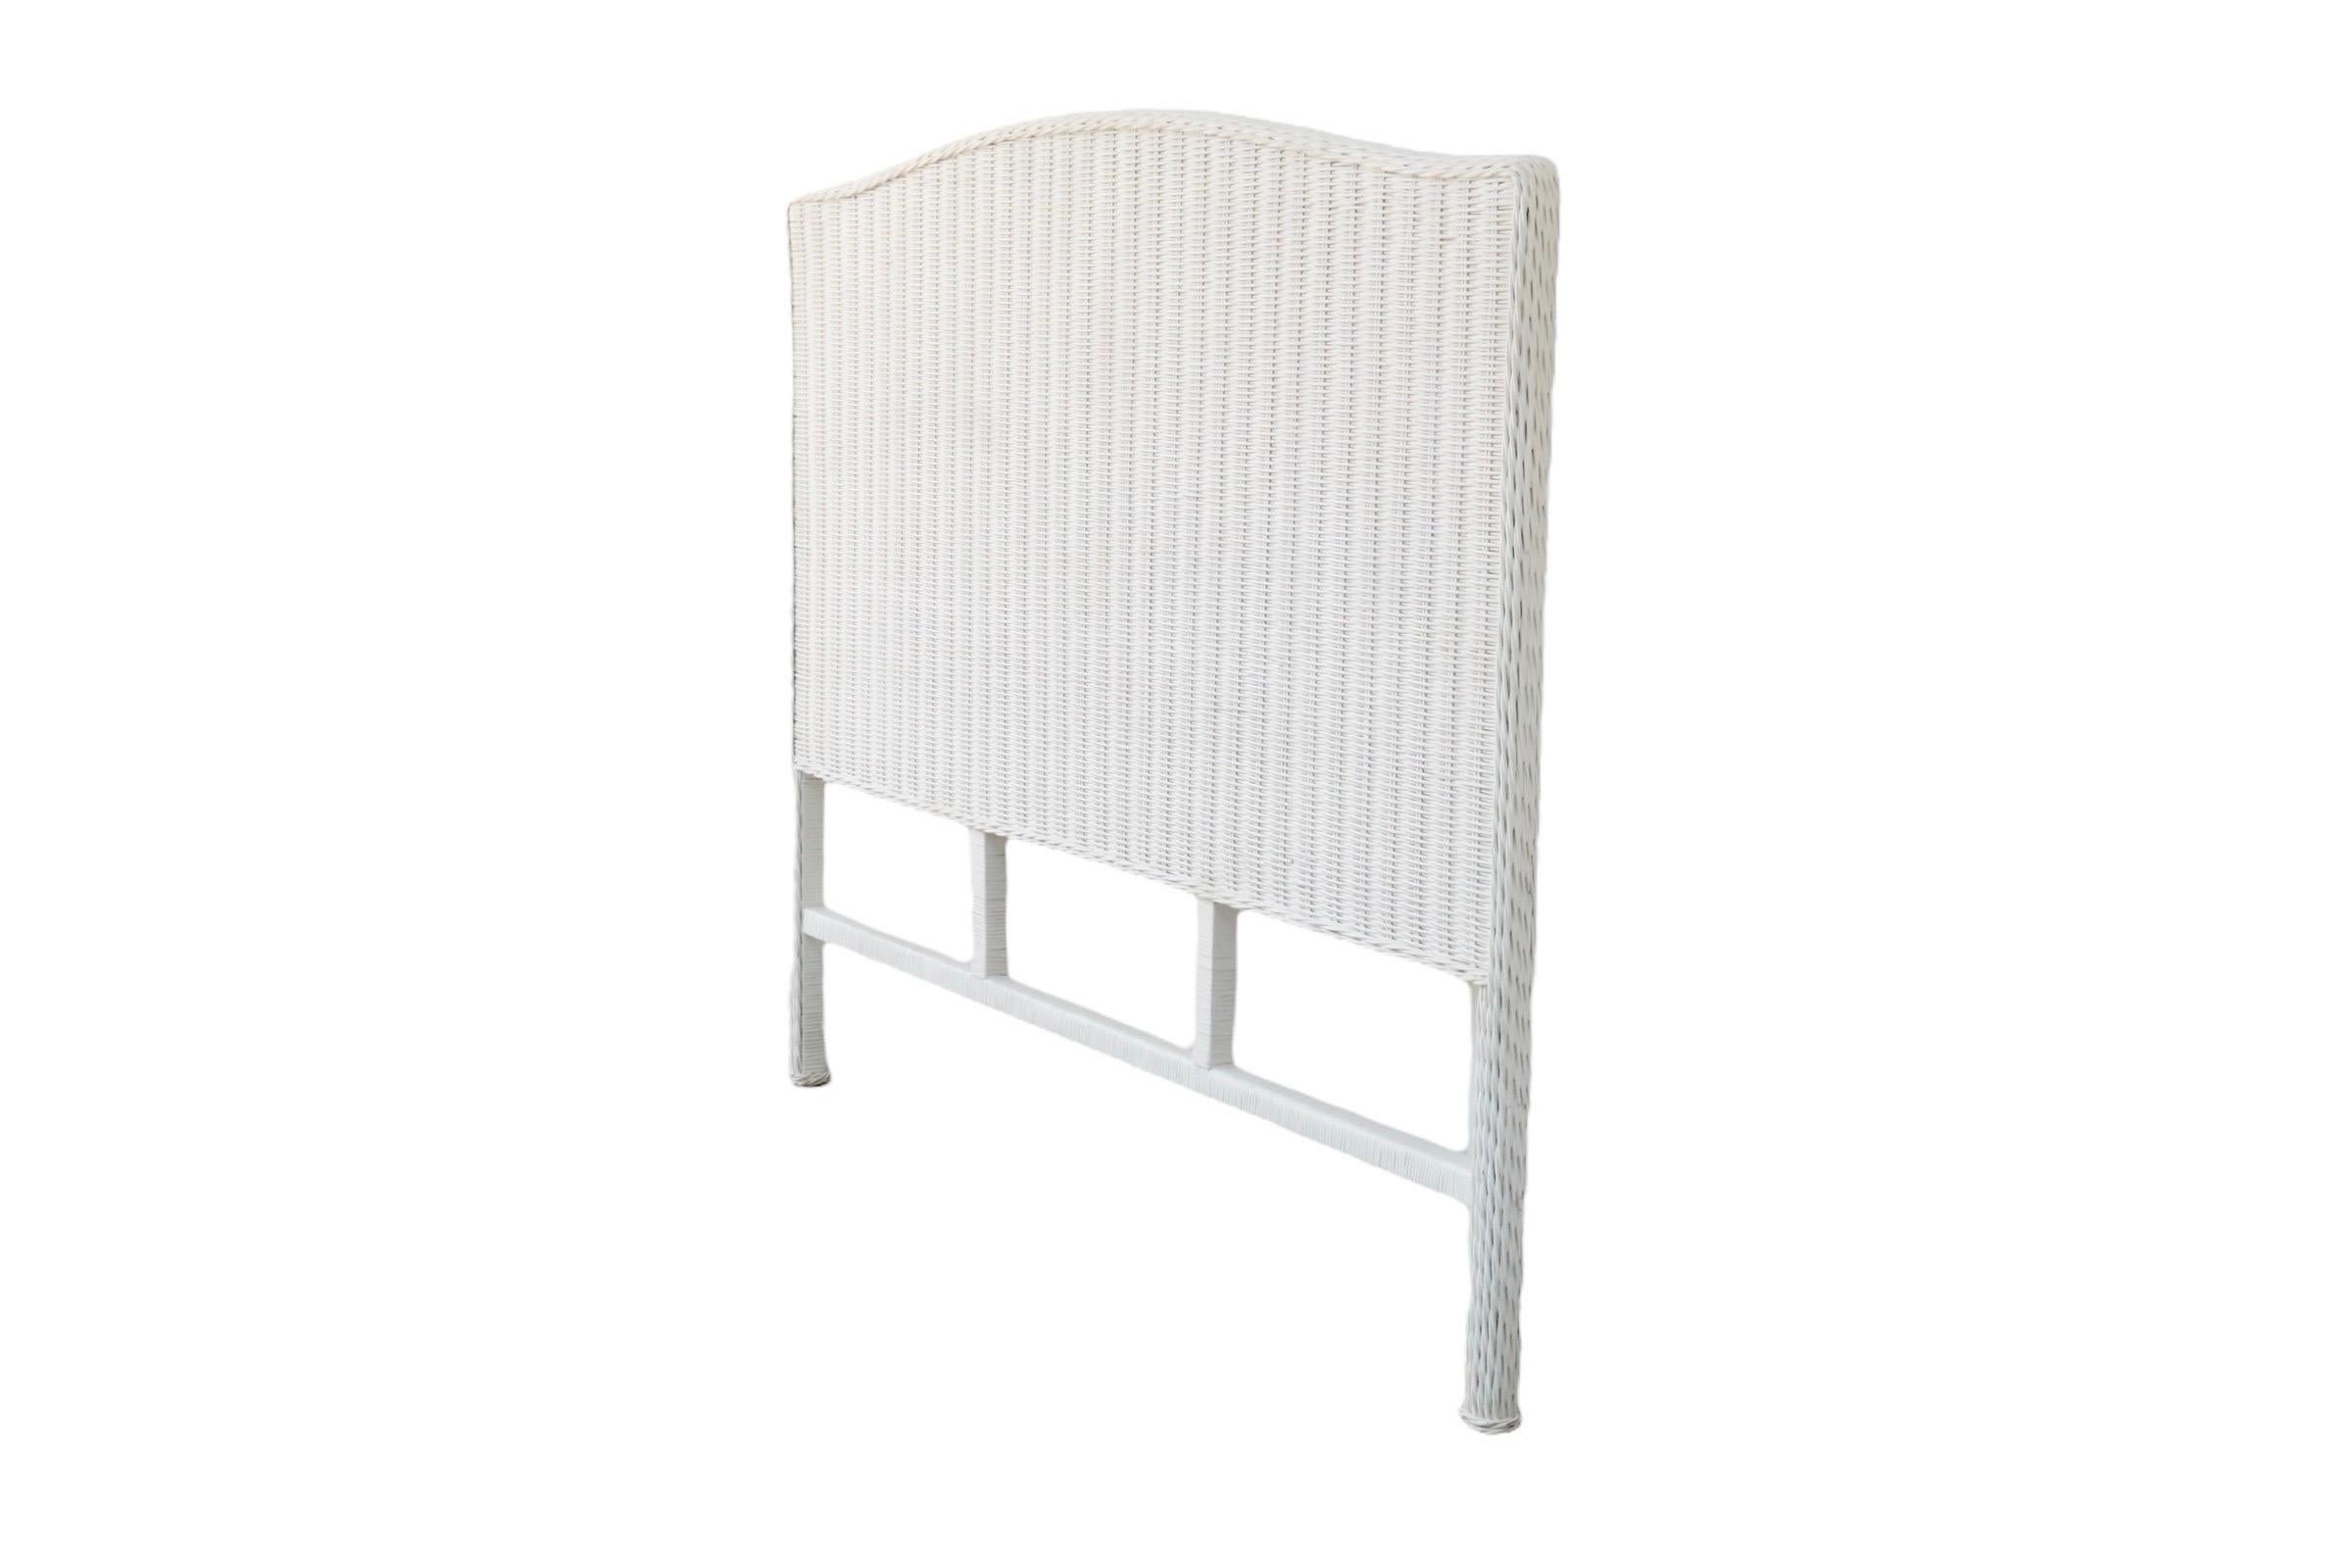 A woven Queen size white wicker headboard. Squarish with a gentle camel shaped crest rail, finished with a thick braided trim that extends down rattan wrapped legs.

